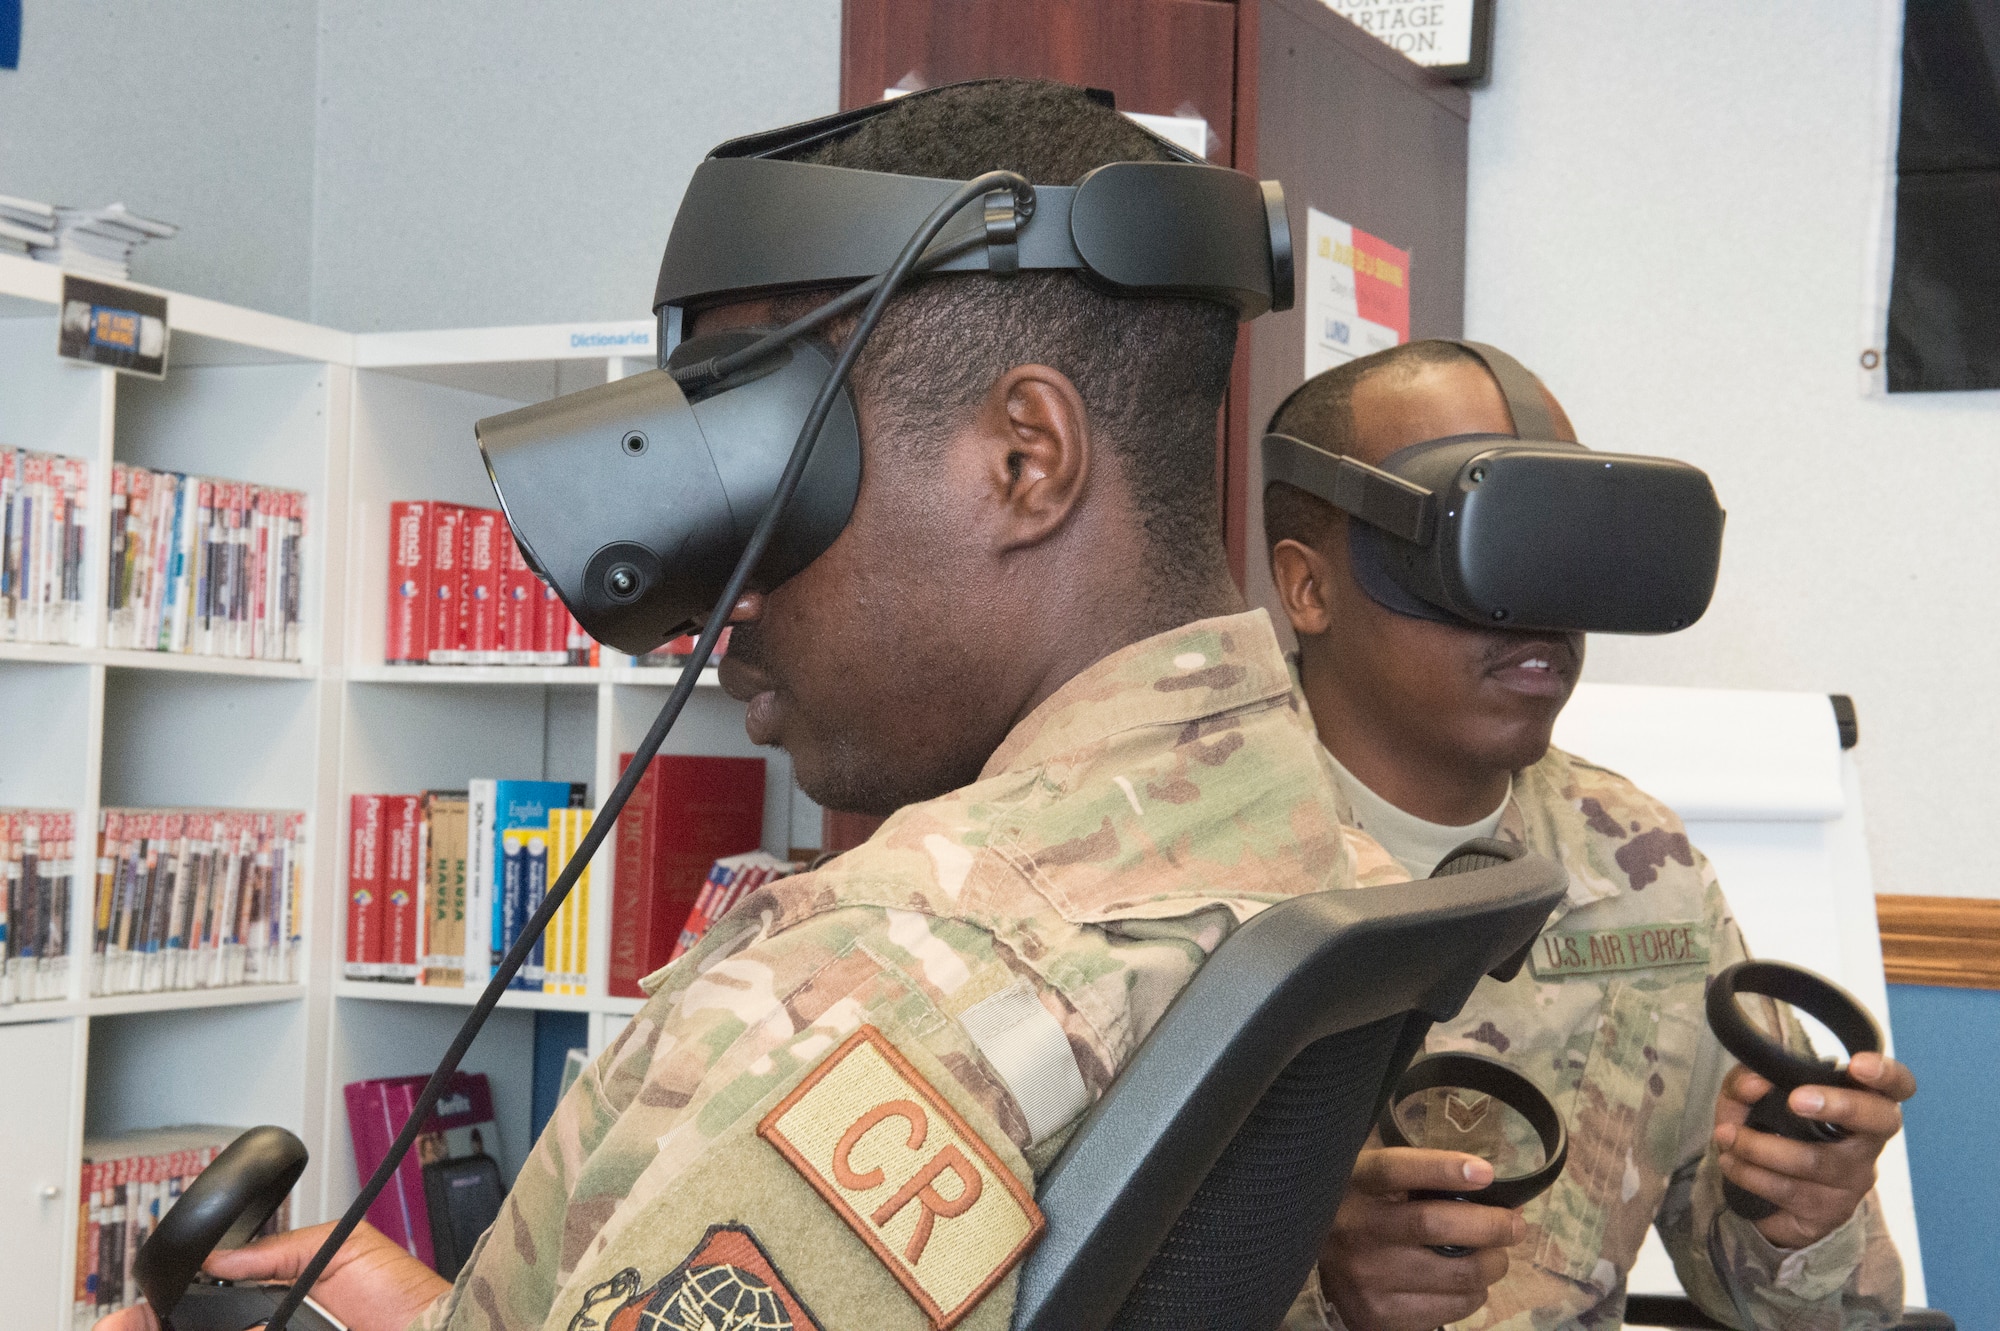 Airman 1st Class Etchy Tambe (left) and Senior Airman Trevaughn Taylor (right), 621st Contingency Response Squadron aerial porter journeymen, test out the French language virtual reality programs at the Language Learning Center at Joint Base McGuire-Dix-Lakehurst, New Jersey, Mar. 3, 2019. The LLC was created to help Airmen from the 818th Mobility Support Advisory Squadron maintain French language proficiency for their frequent trips to Africa in support of developing air mobility capabilities. (U.S. Air Force photo by Staff Sgt. Sarah Brice)